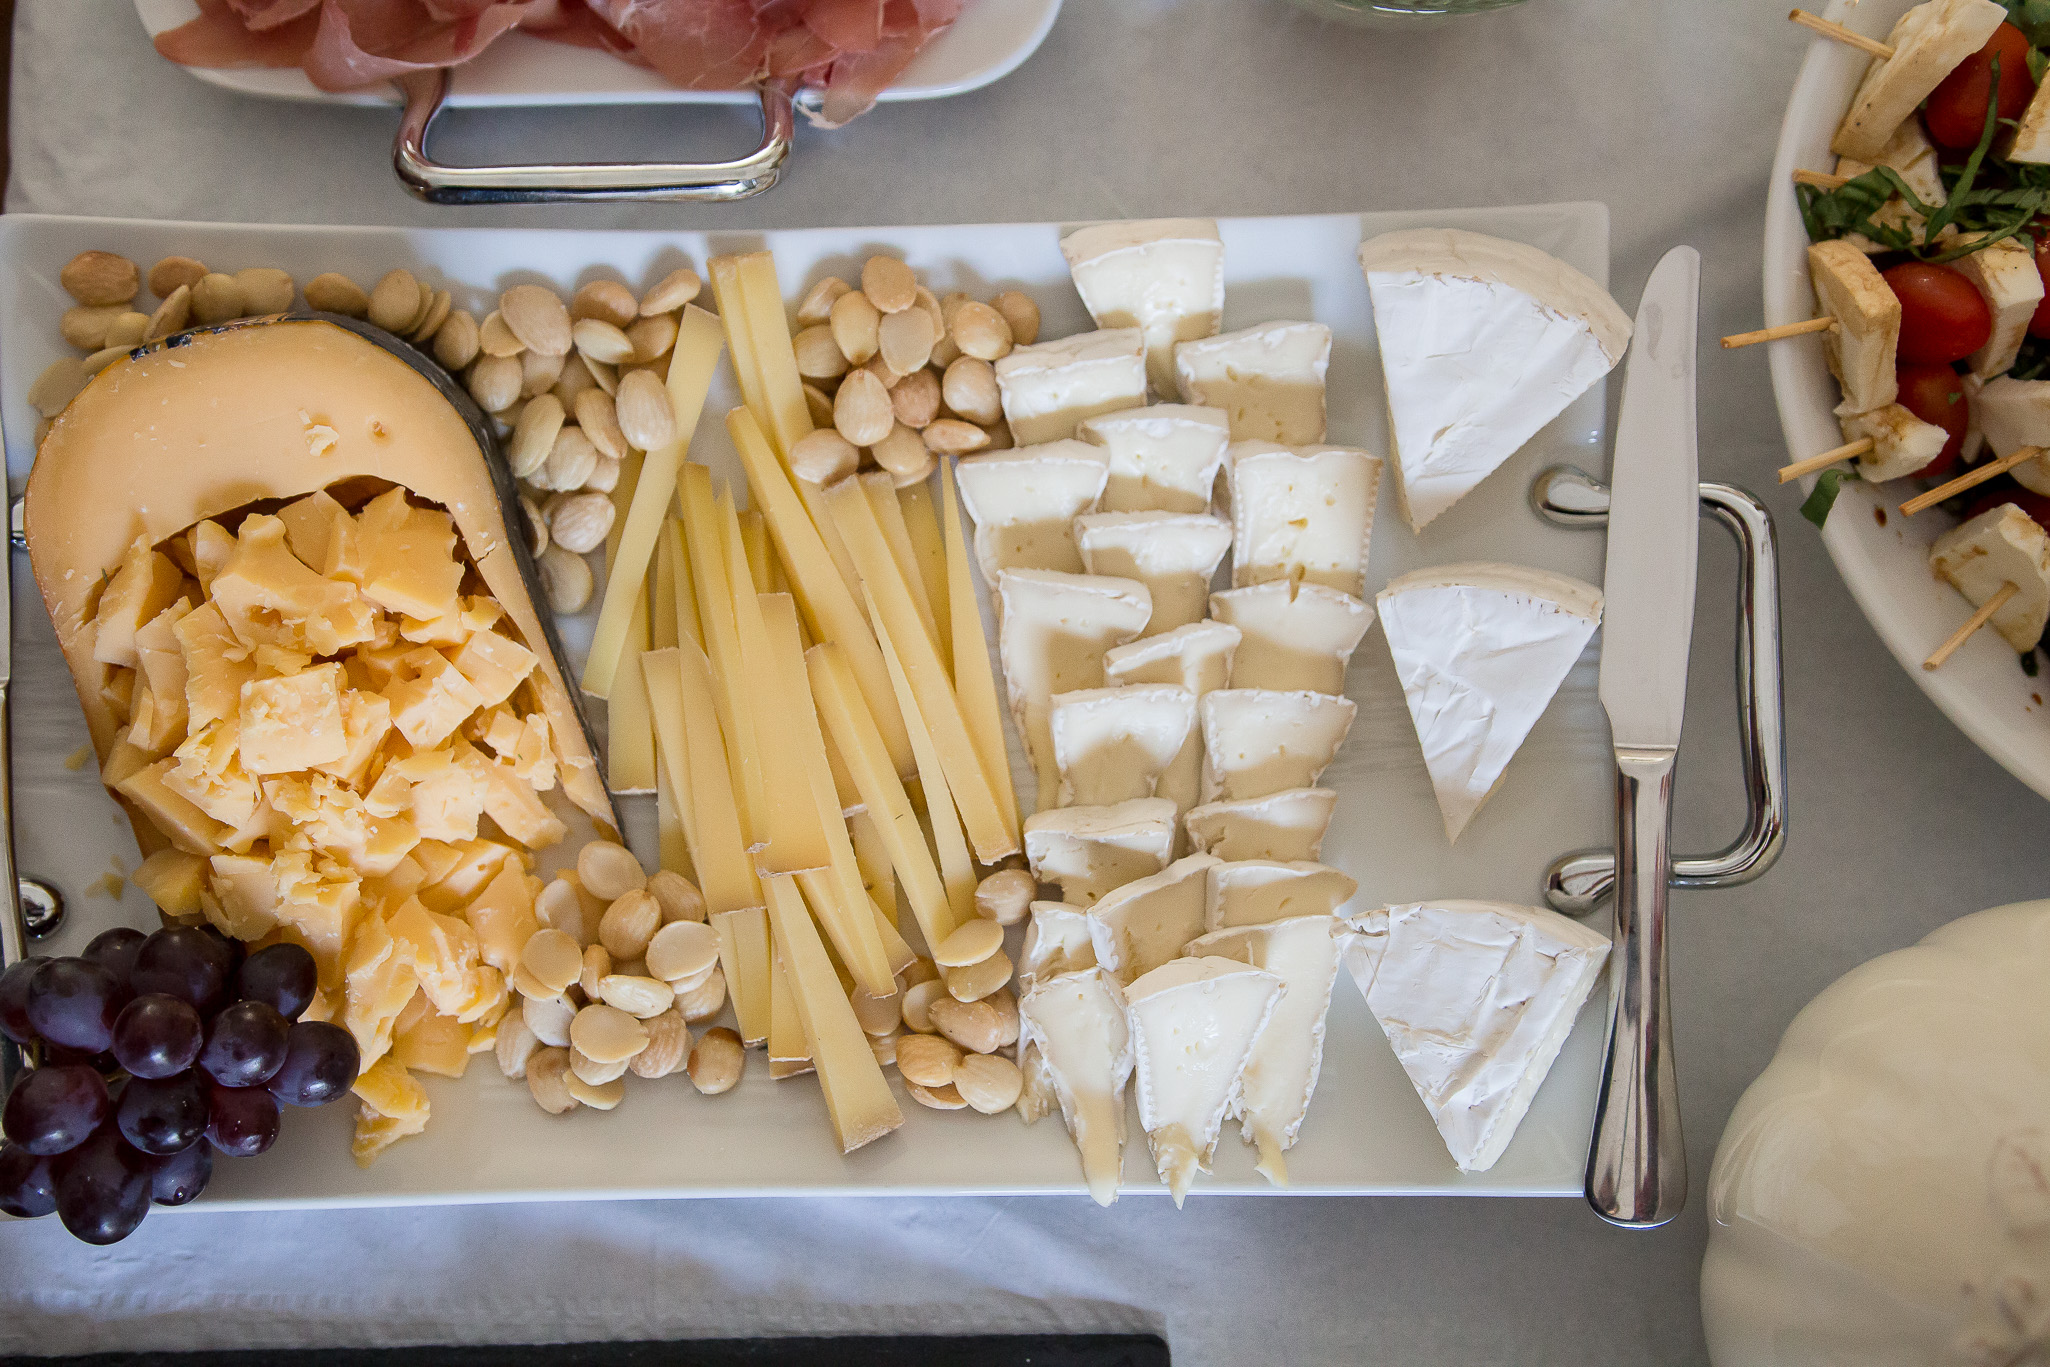 Some Marcona almonds and a bit of fruit can dress up a cheese plate in no time.